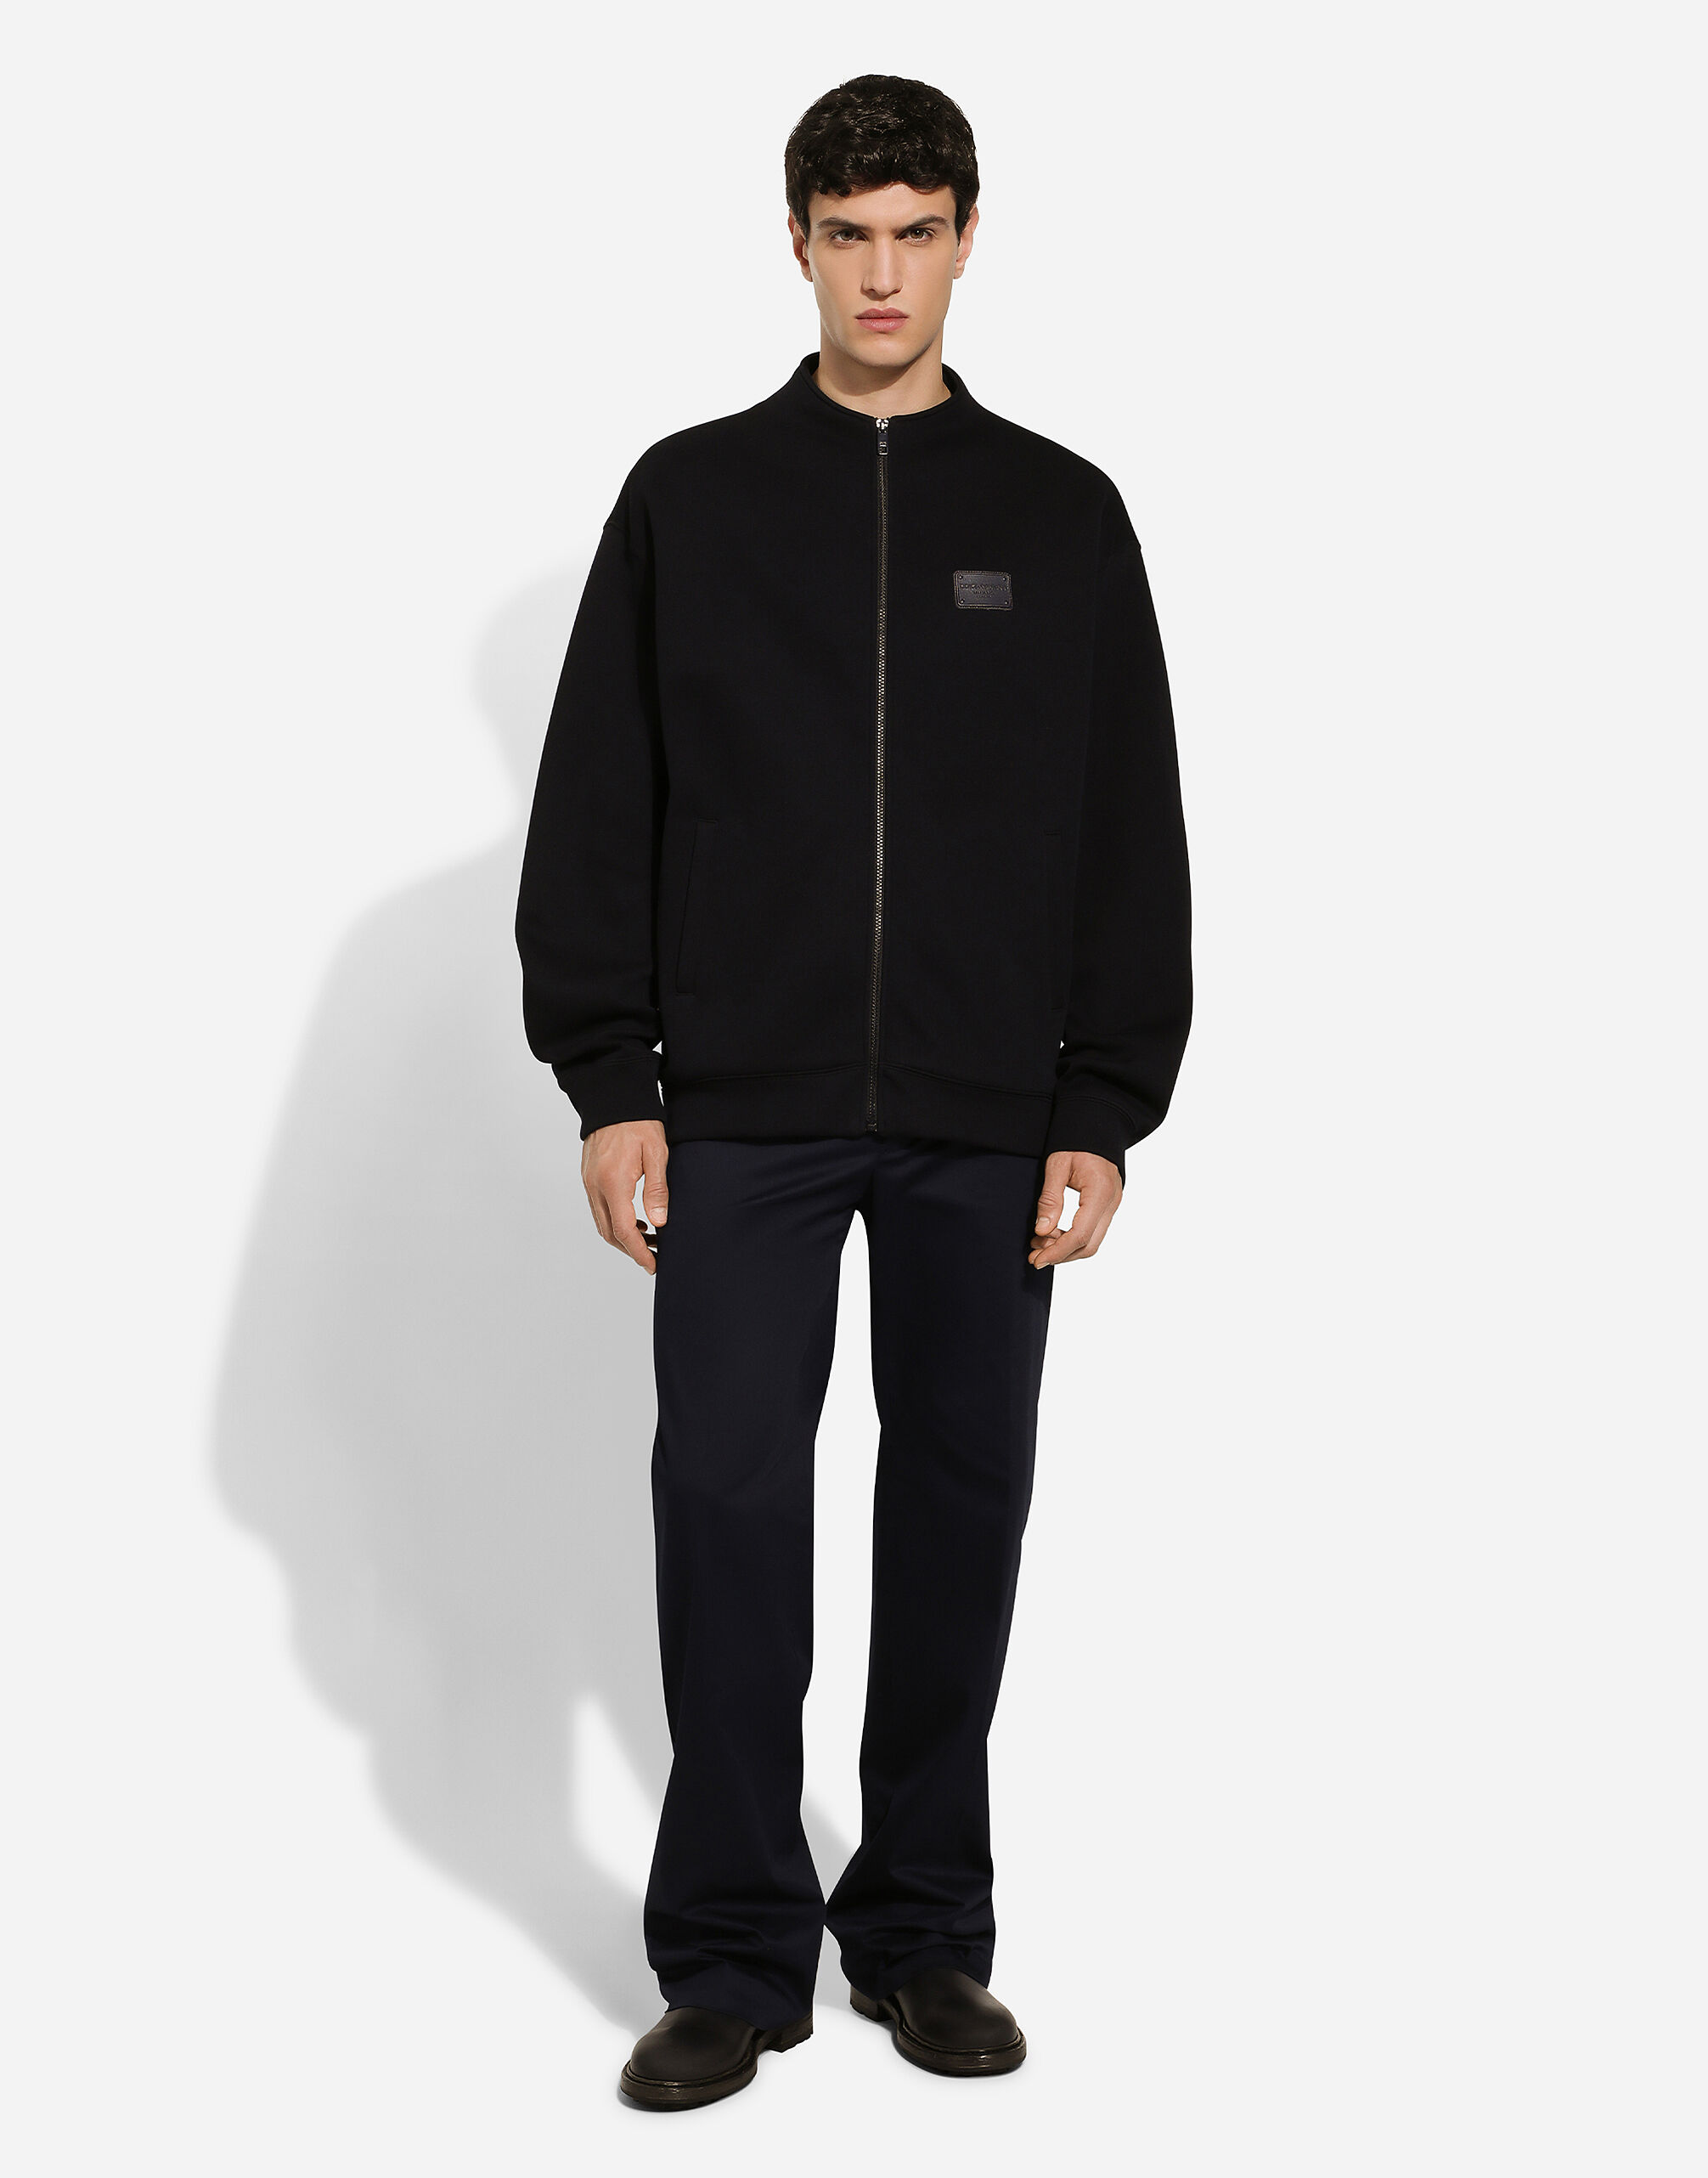 Zip-up sweatshirt with high neck and tag